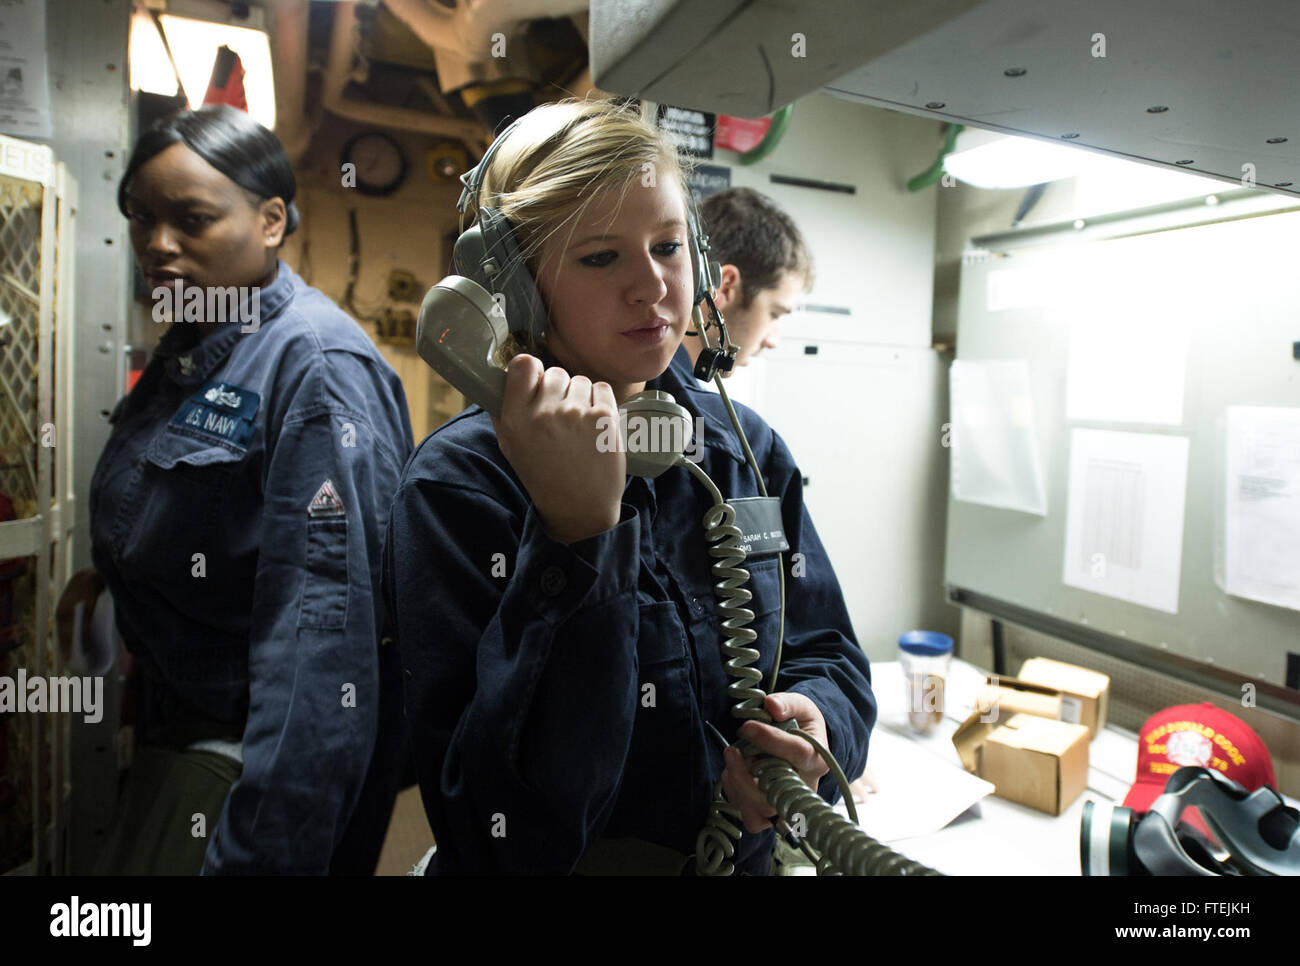 MEDITERRANEAN SEA (Dec. 16, 2014) Quartermaster 3rd Class Sarah Watson, from Douglasville, Georgia, stands watch as a phone talker during a general quarters drill aboard USS Donald Cook (DDG 75) Dec. 16, 2014. Donald Cook, an Arleigh Burke-class guided-missile destroyer, forward-deployed to Rota, Spain, is conducting naval operations in the U.S. 6th Fleet area of operations in support of U.S. national security interests in Europe. Stock Photo